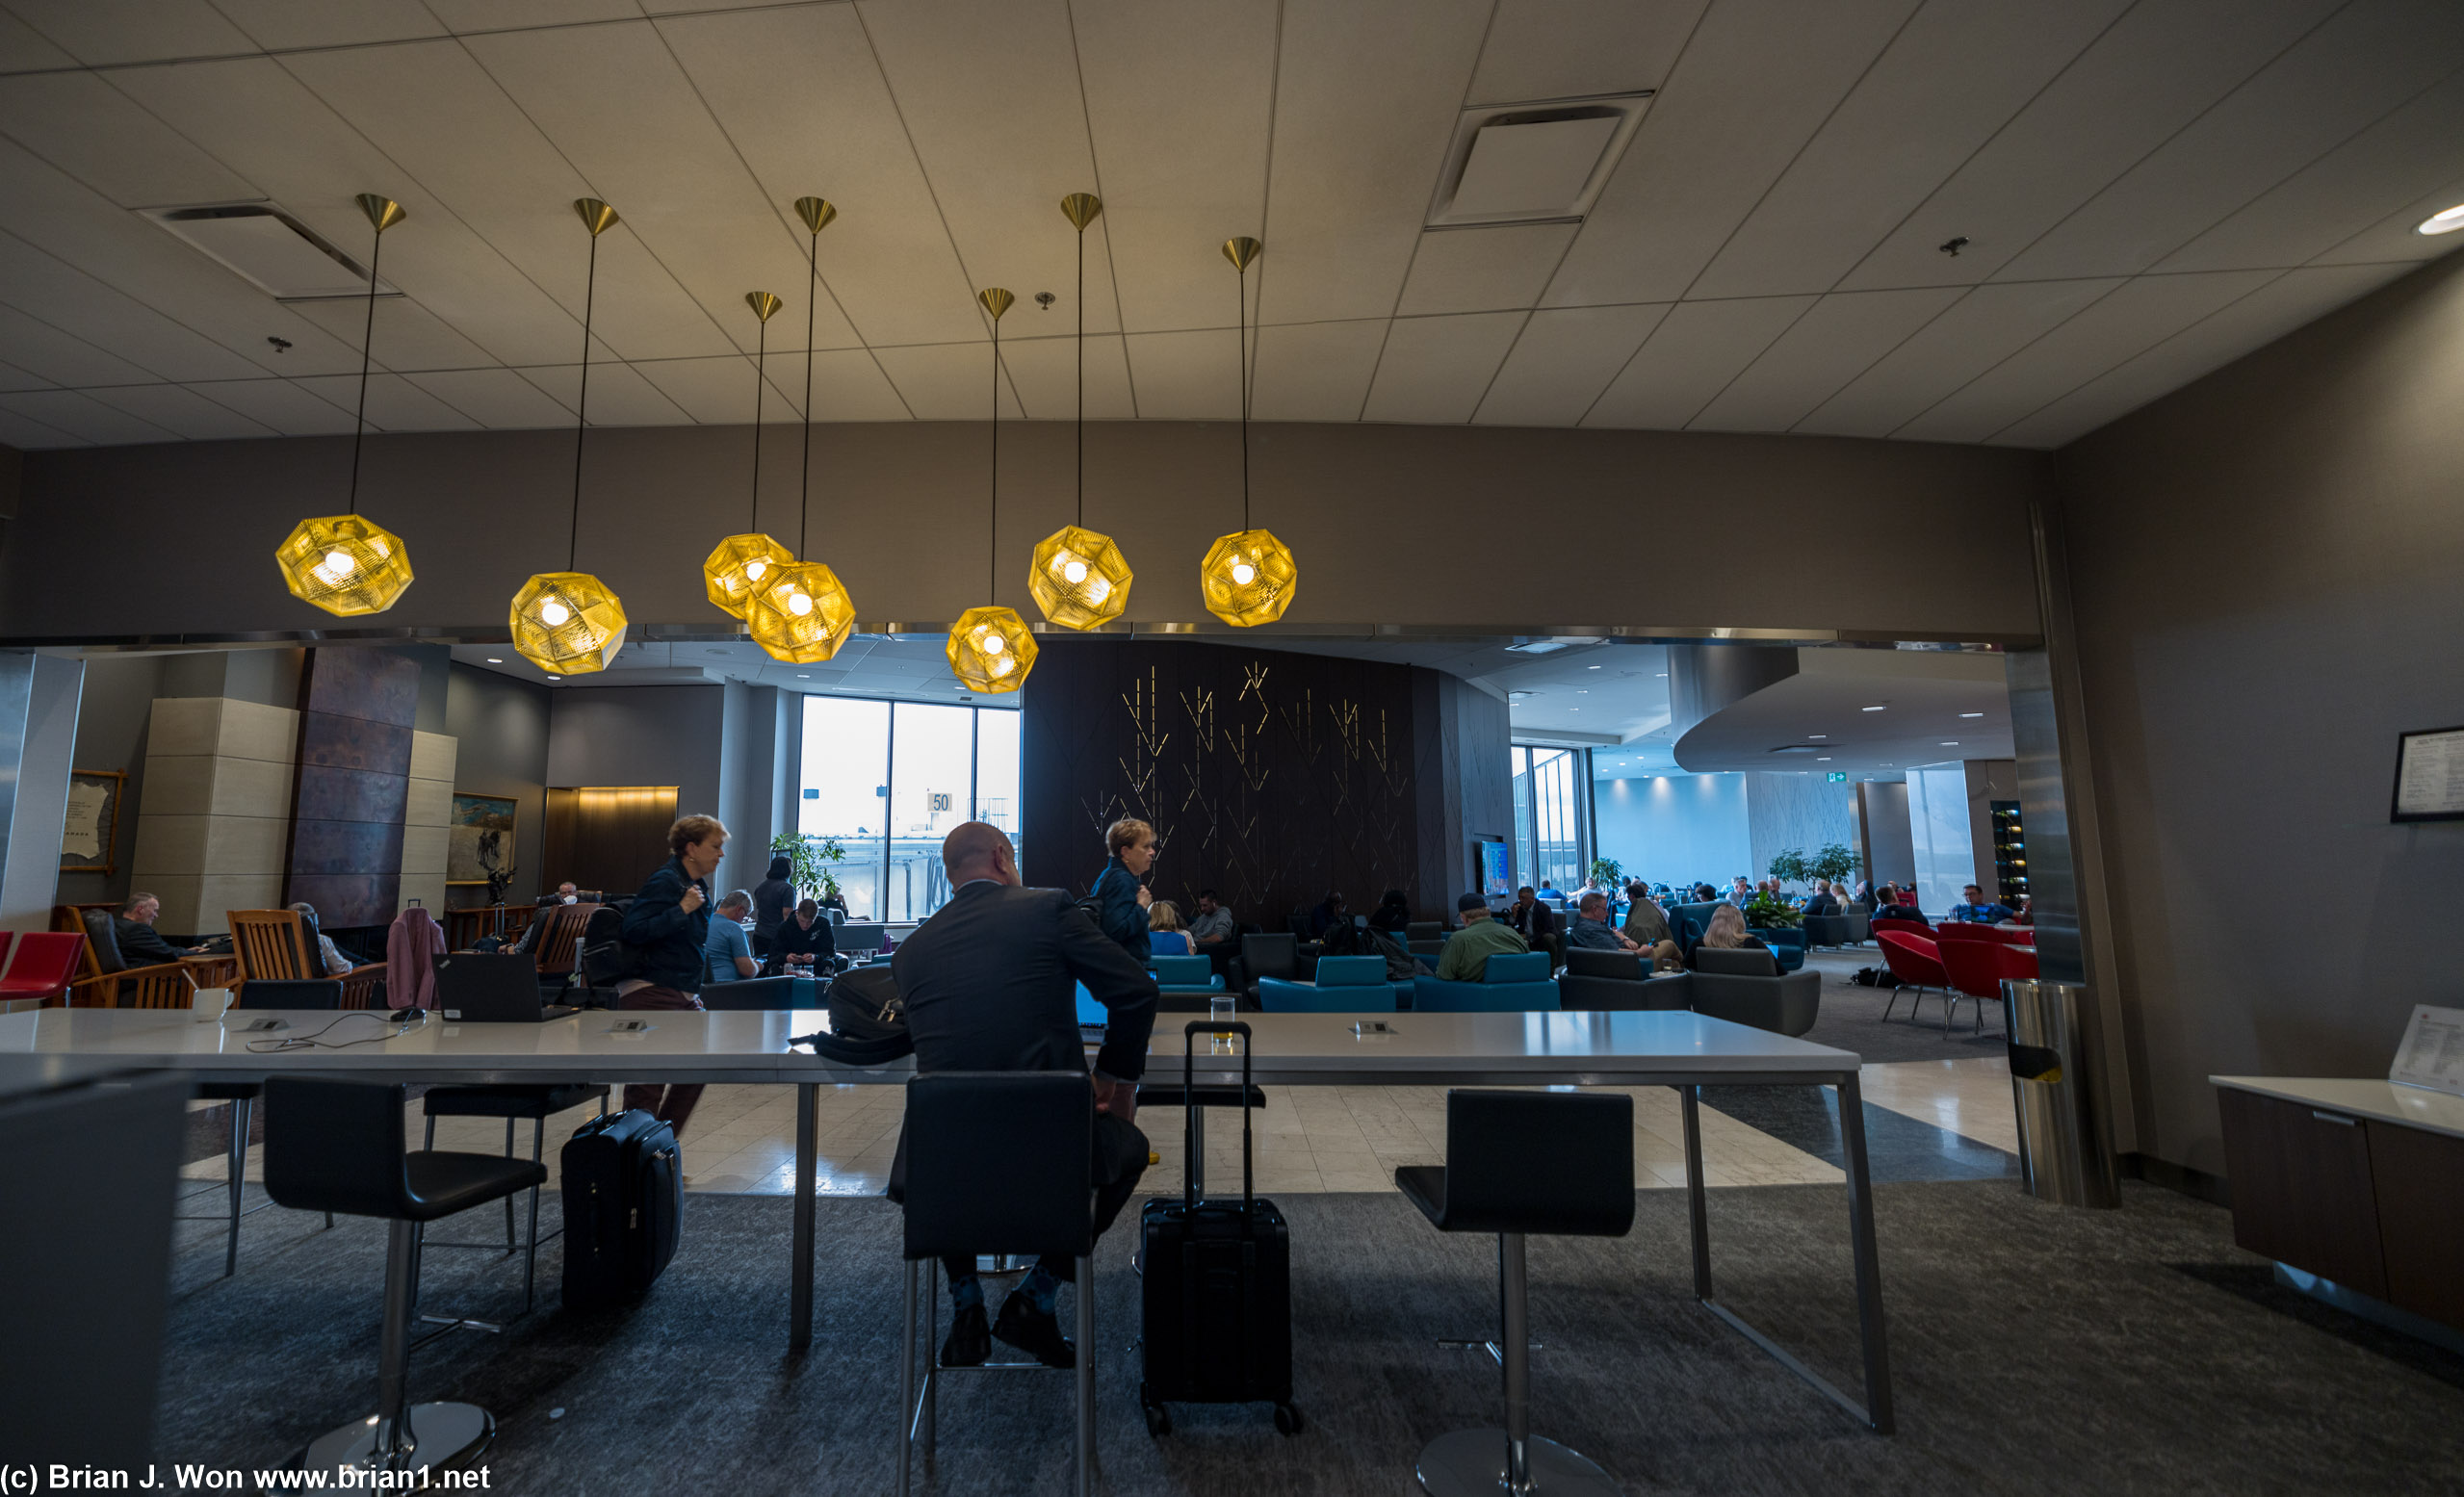 Inside the Air Canada Maple Leaf Lounge in Calgary.